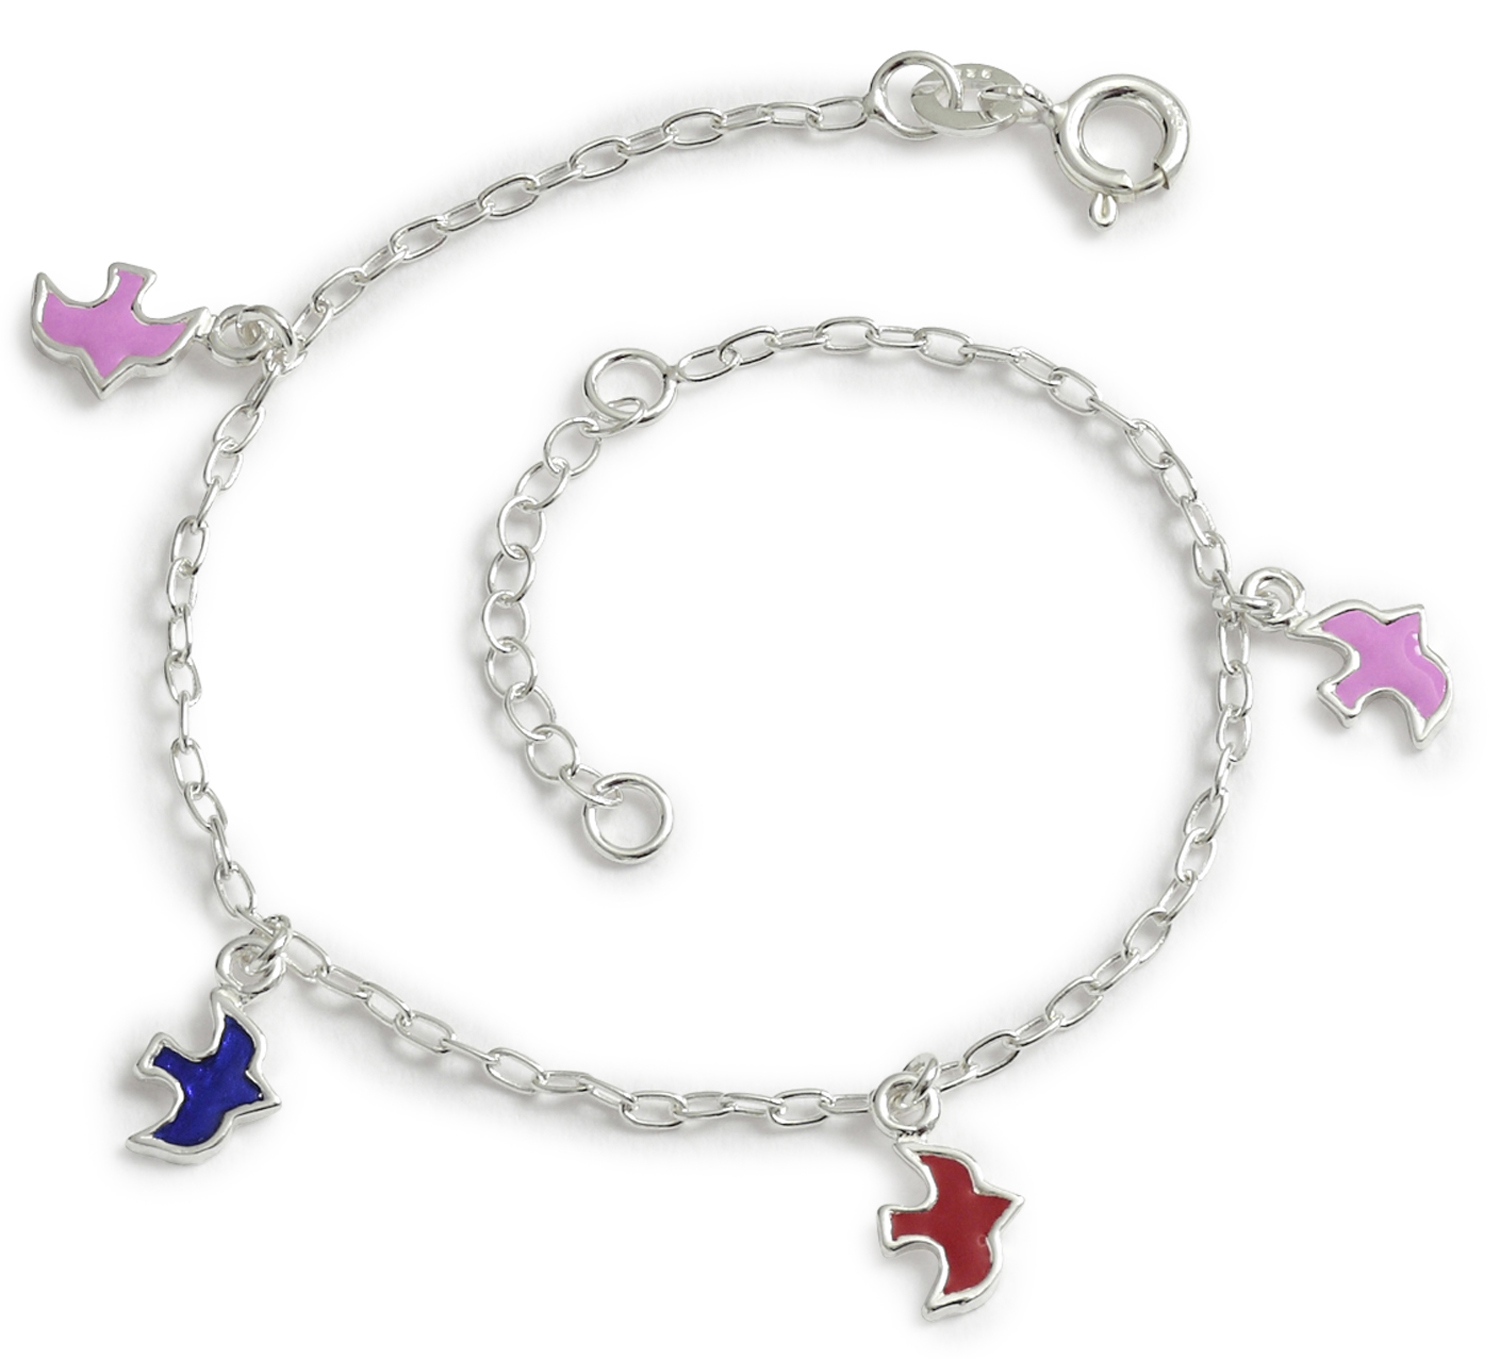 Handmade Sterling Silver Baby Child Identity Bracelet IJ-080070A Car with  Platinum Plating and Precious Stones (Enamel)